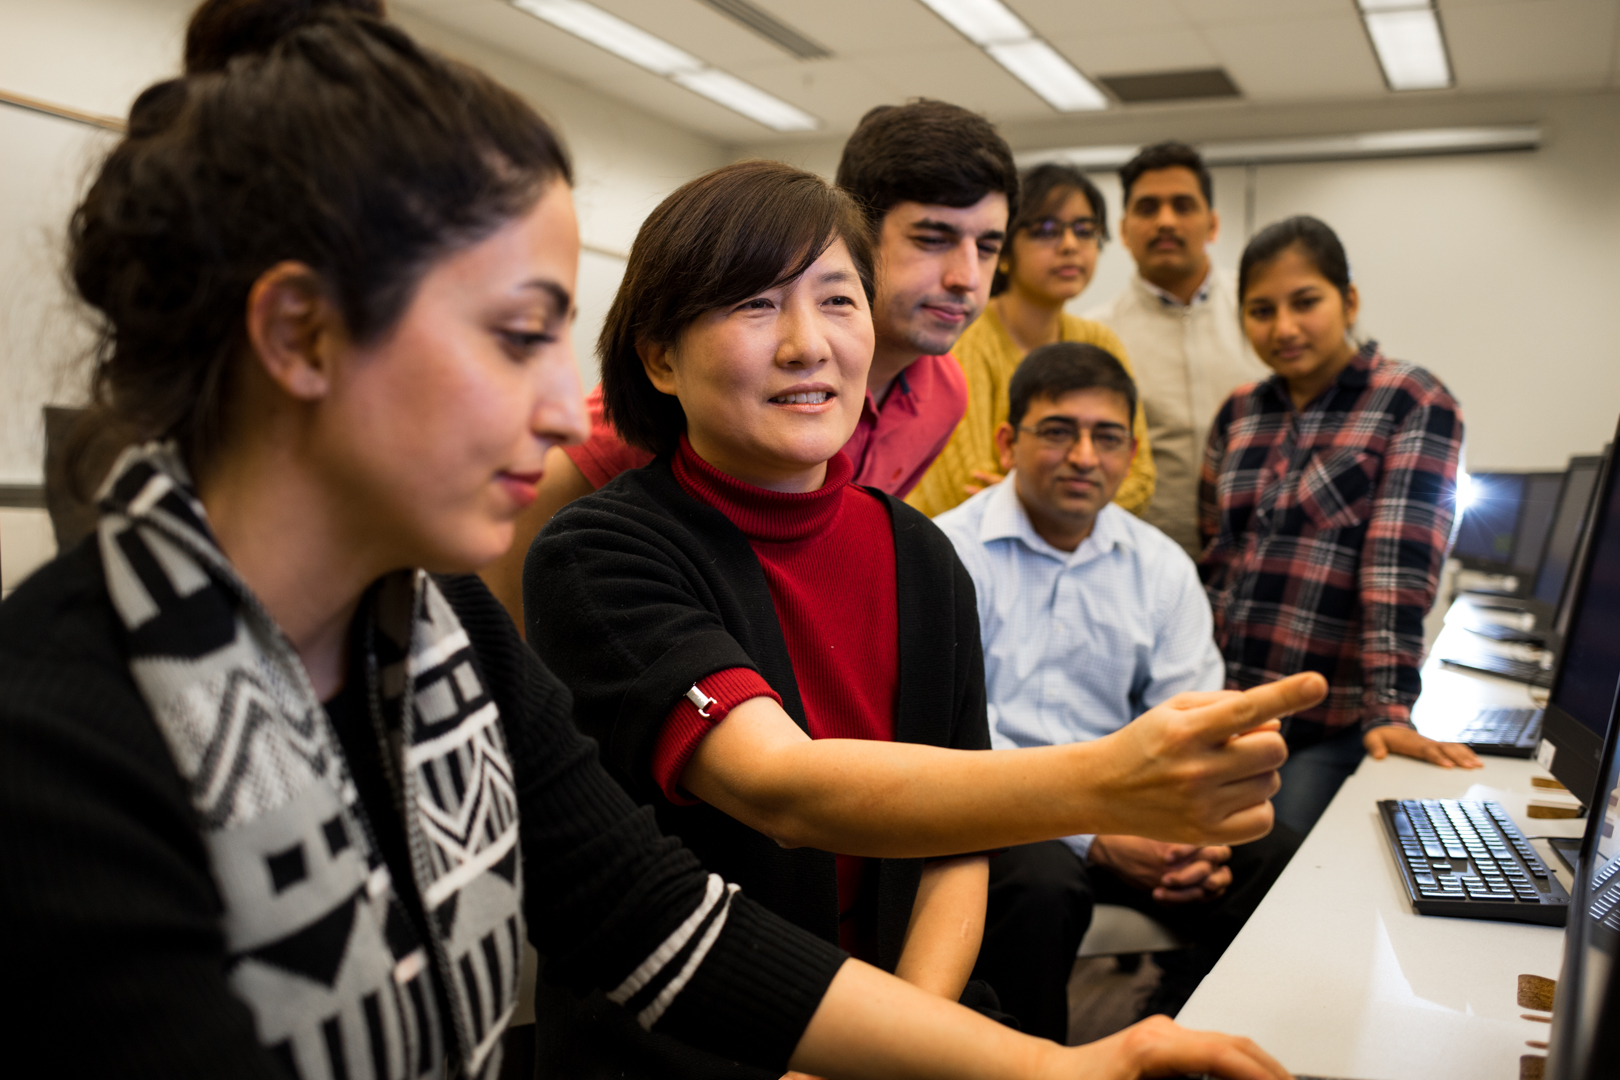 sce-dr.-lee-portrait-in-computer-lab-with-students-67-6844.jpg